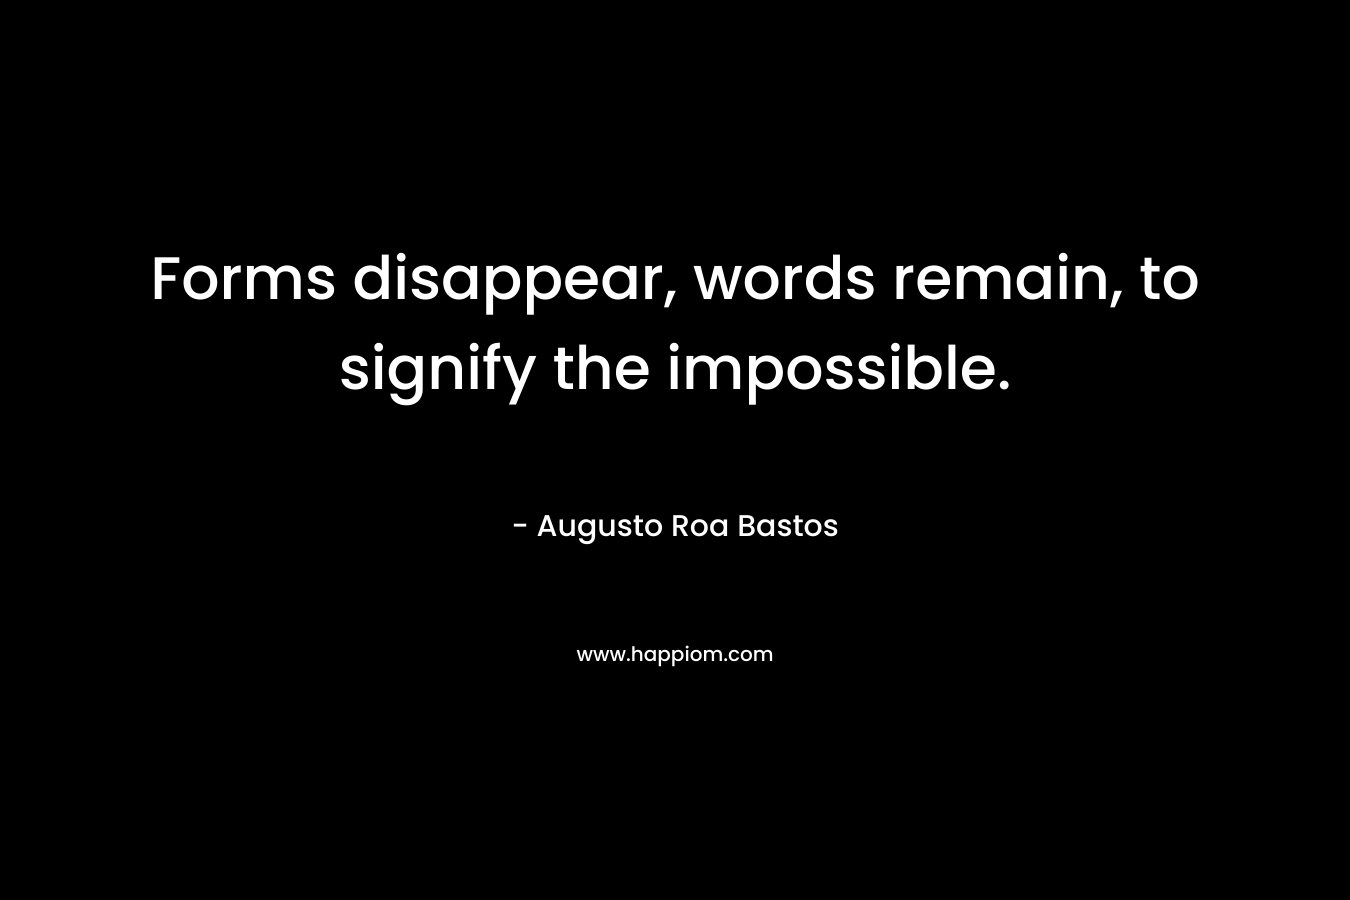 Forms disappear, words remain, to signify the impossible.